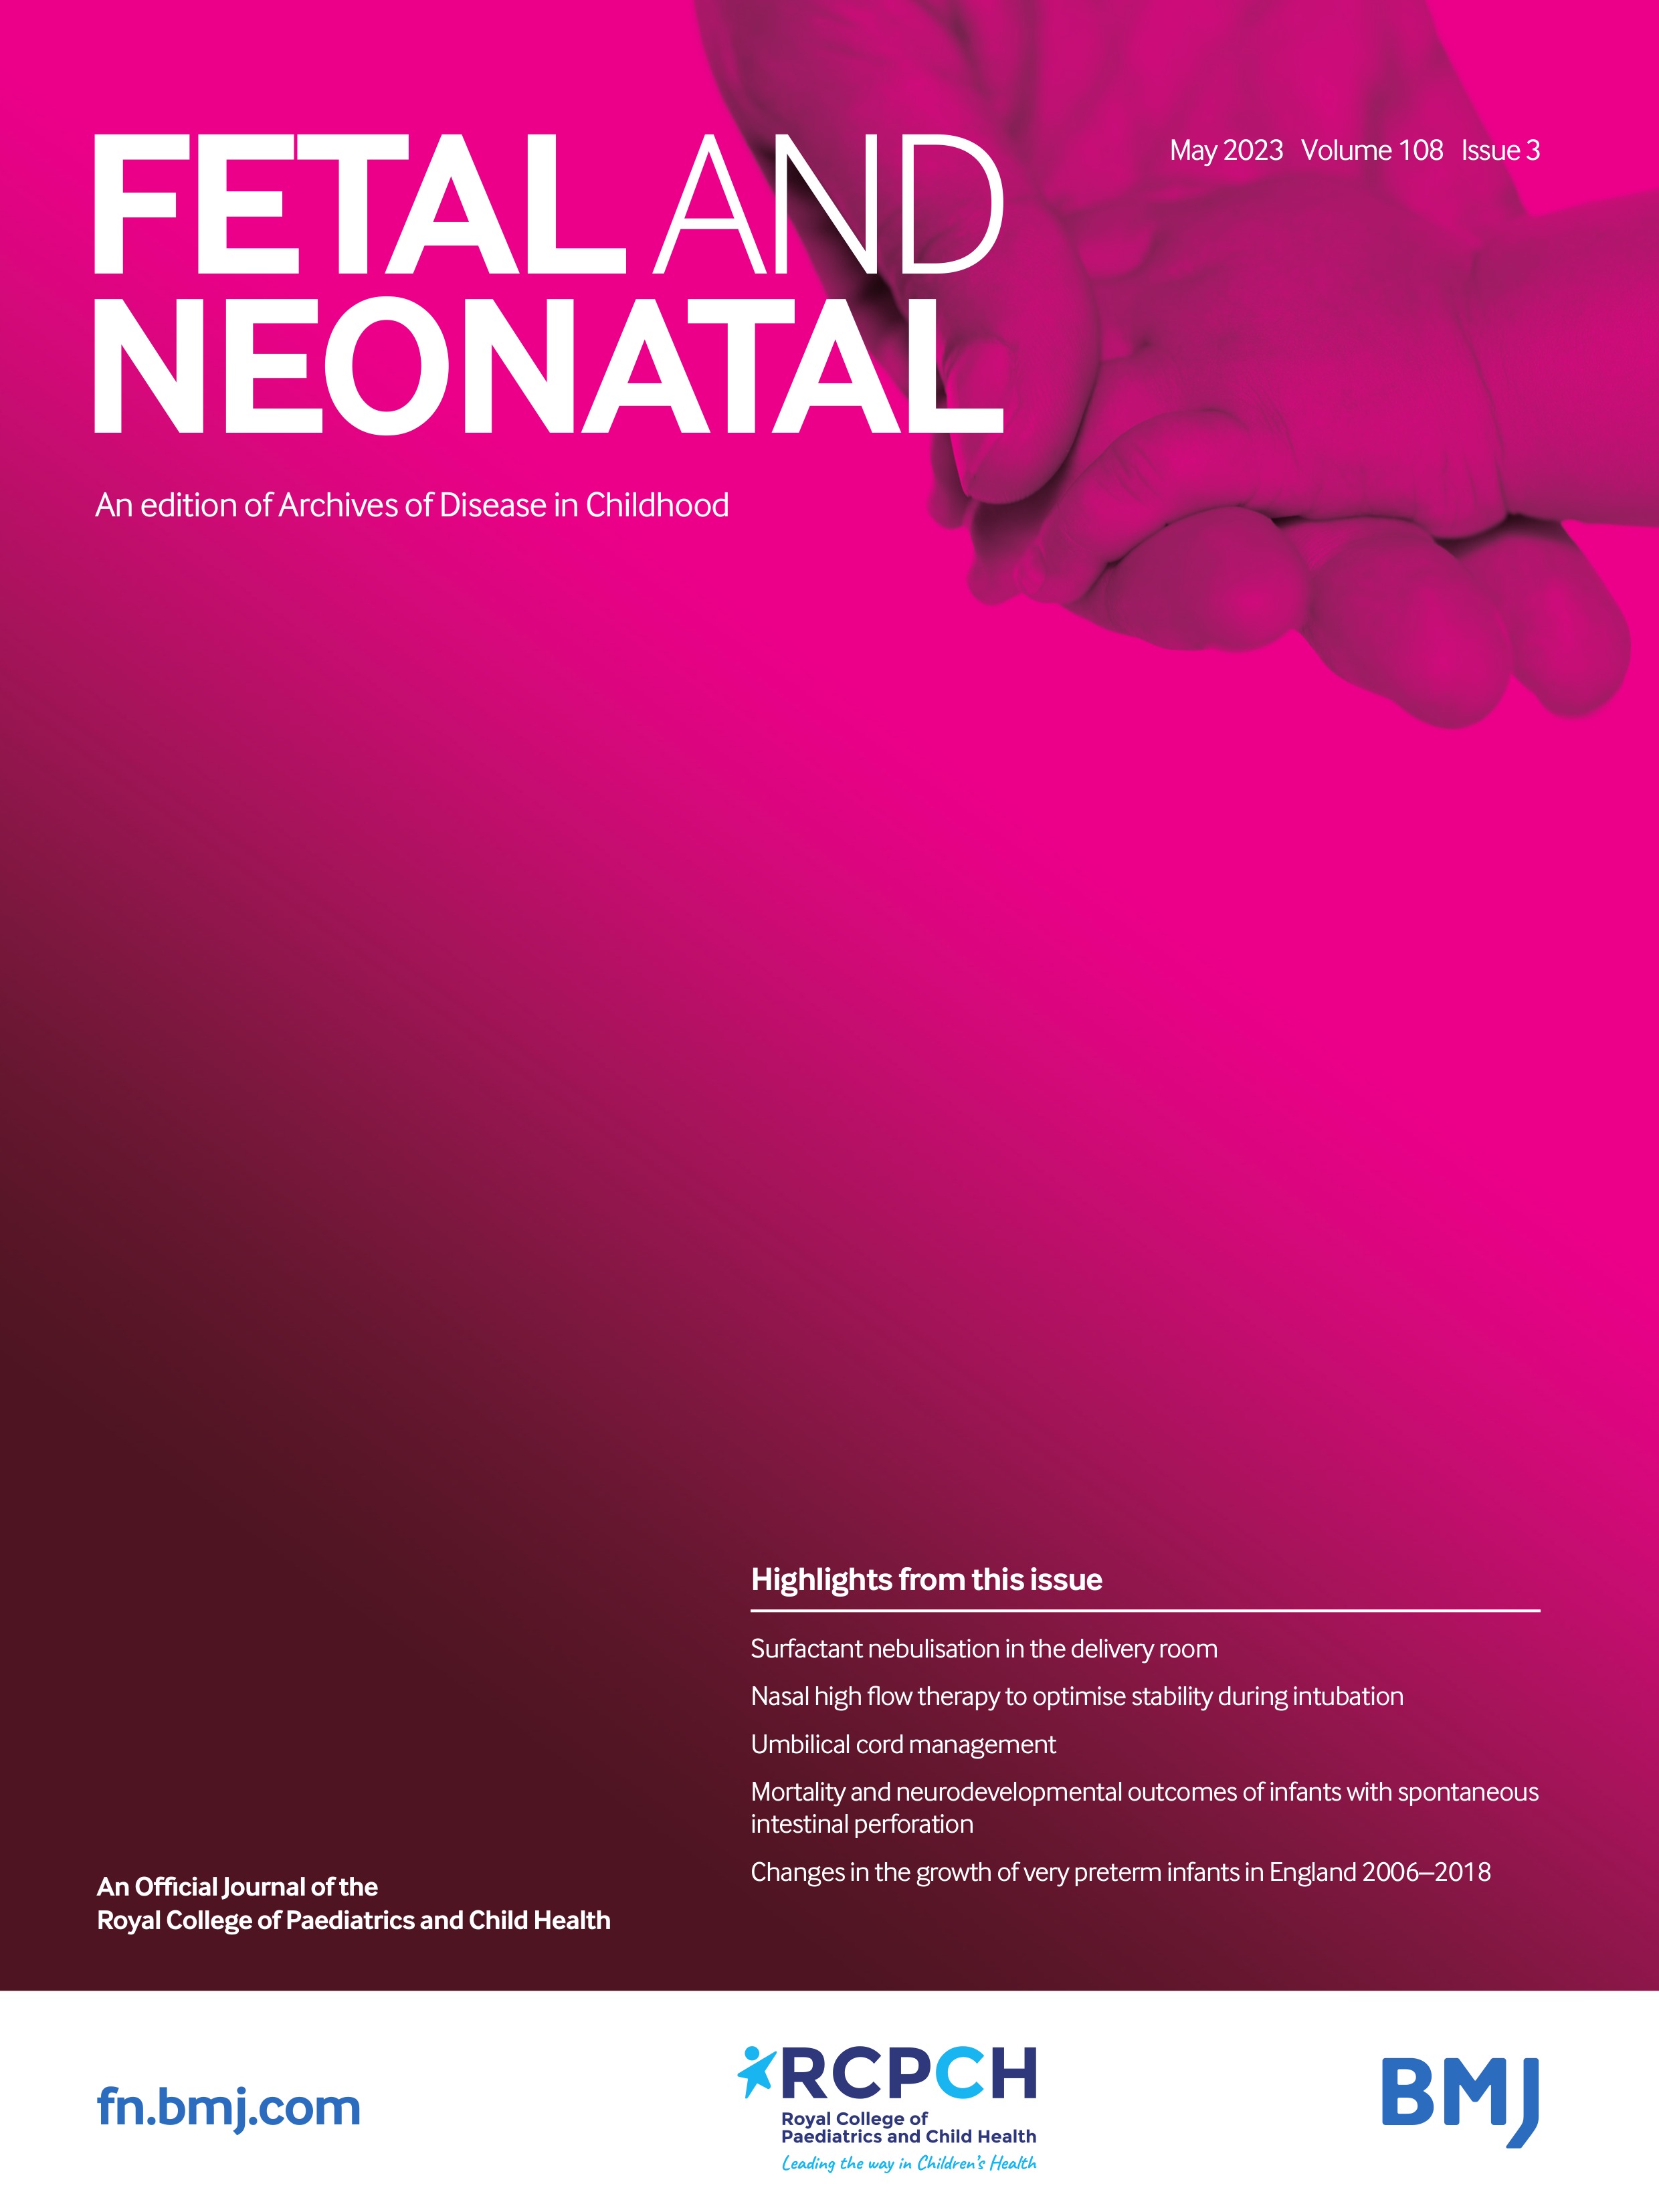 Do newborn infants exhale through the CPAP system? Secondary analysis of a randomised cross-over trial